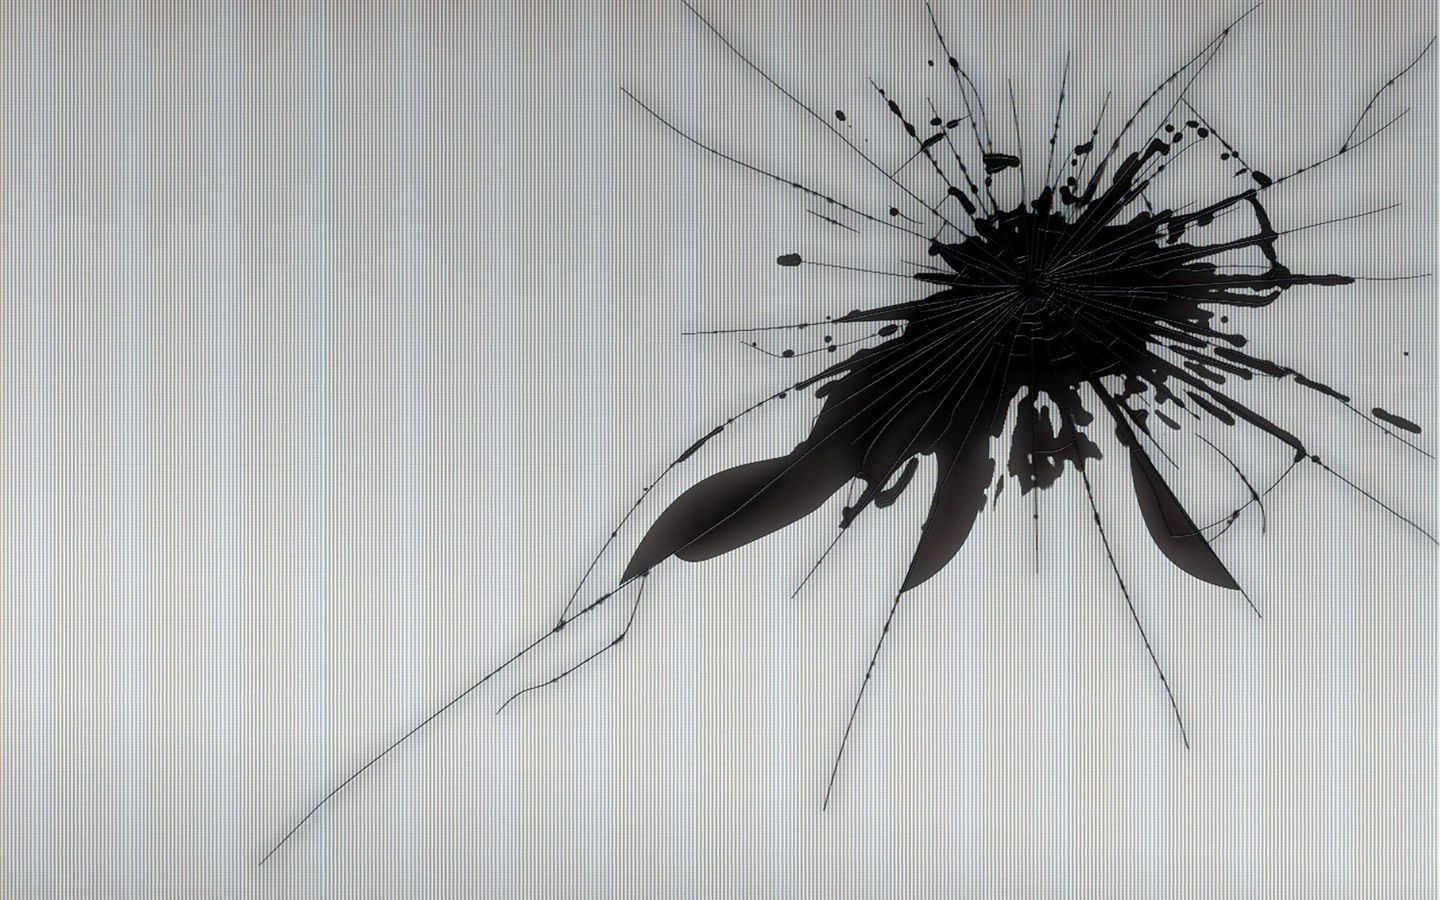 Download Cracked Lcd Screen Wallpaper Full HD Backgrounds